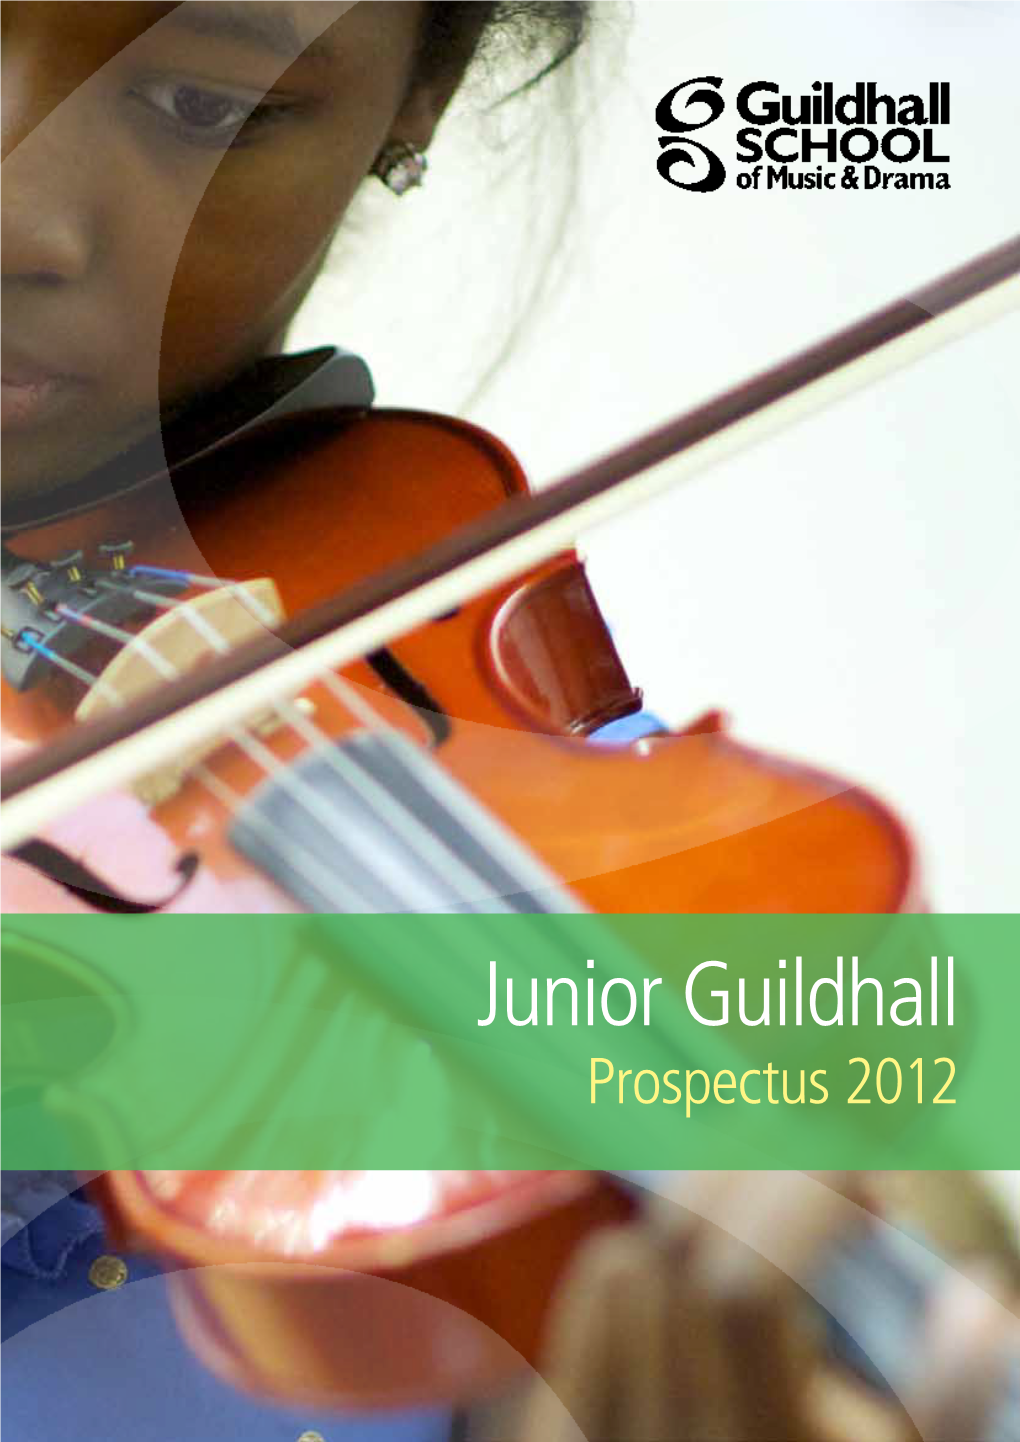 Junior Guildhall Prospectus 2012 WELCOME to JUNIOR GUILDHALL